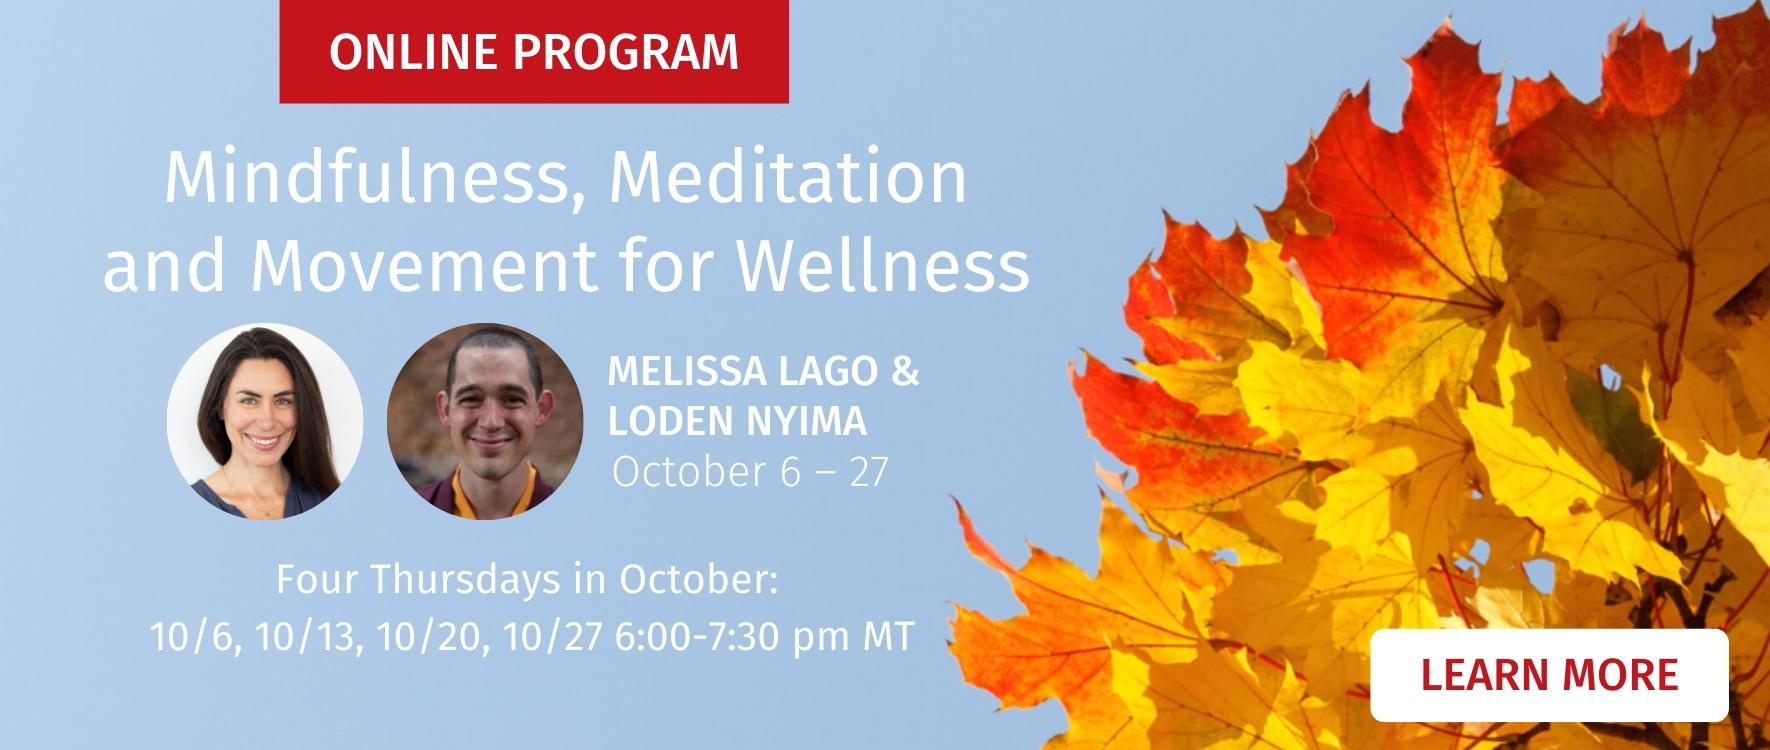 mindfulness, meditation, and movement for wellness online retreat at drala mountain center four thursdays in october 2022